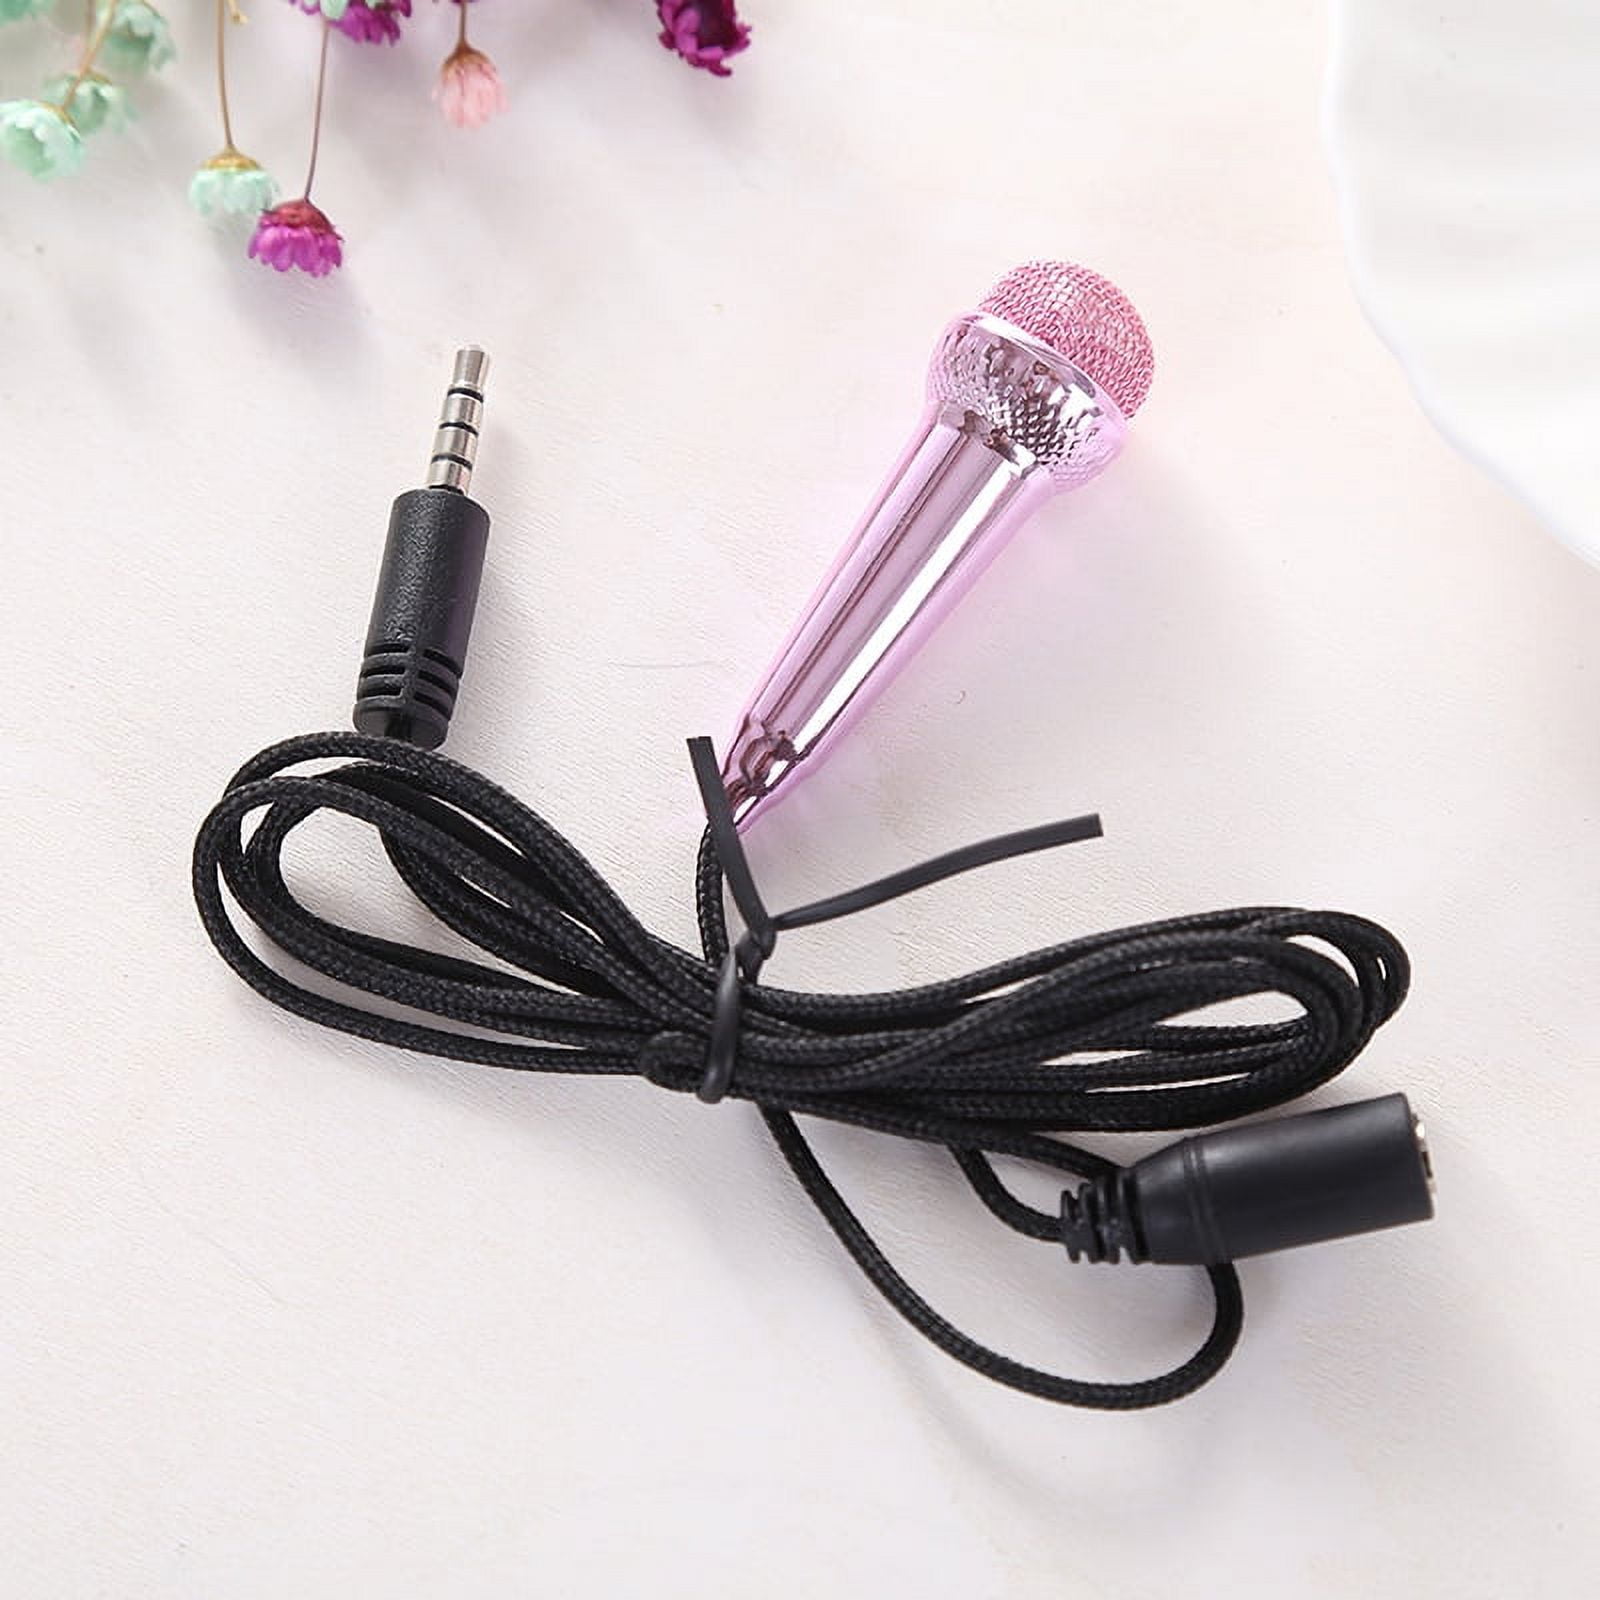 Mini Microphone,tiny Microphone,mini Karaoke Microphone For Mobile Phone  Laptop Notebook Apple Iphone Sumsung Android (pink)